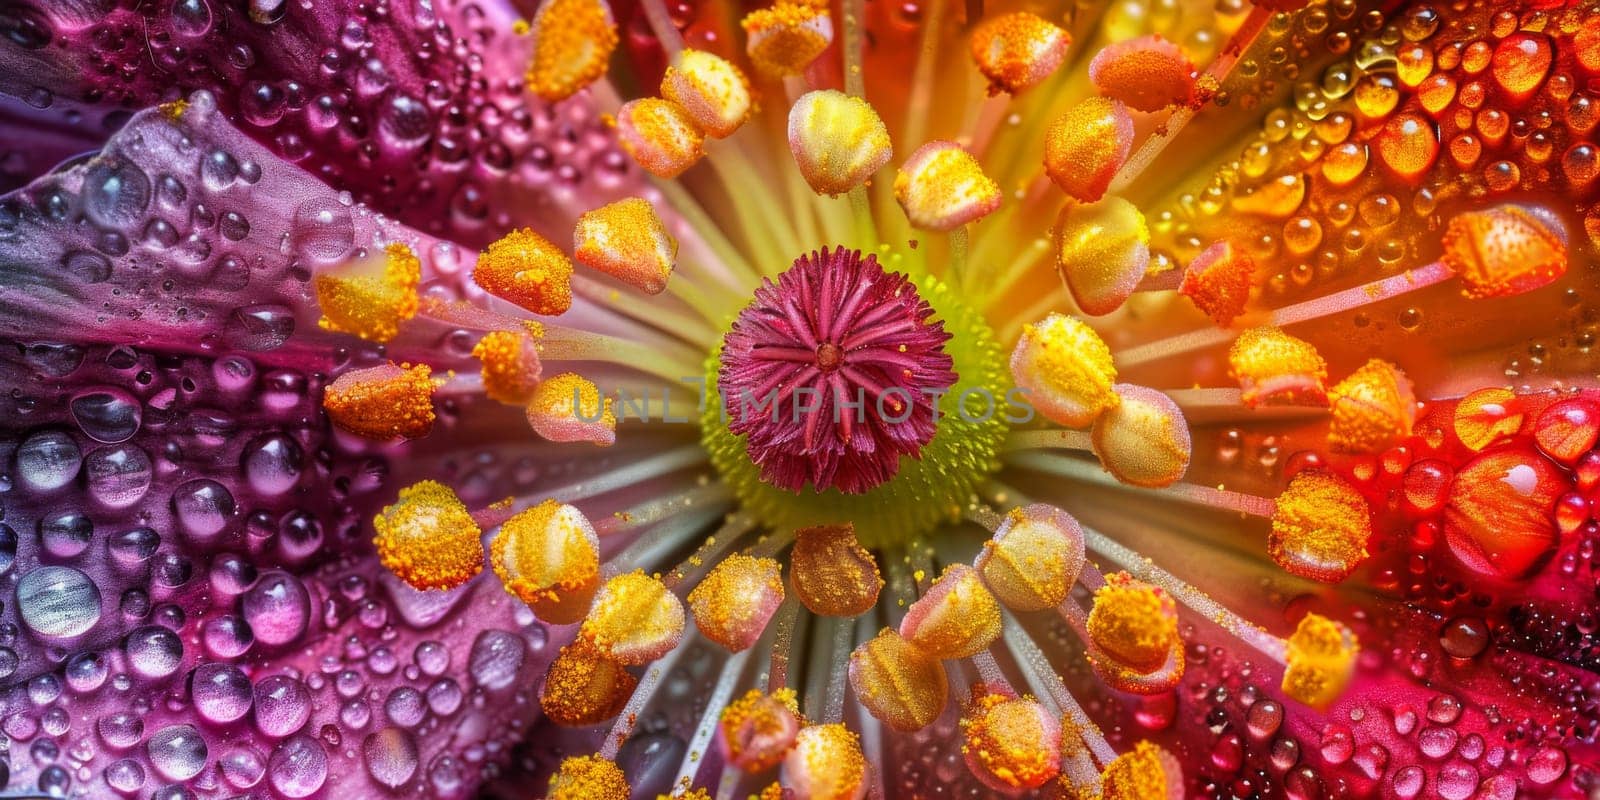 Macro detail to the colorful and textured surface of pollen grains collected on the stamen of a flower